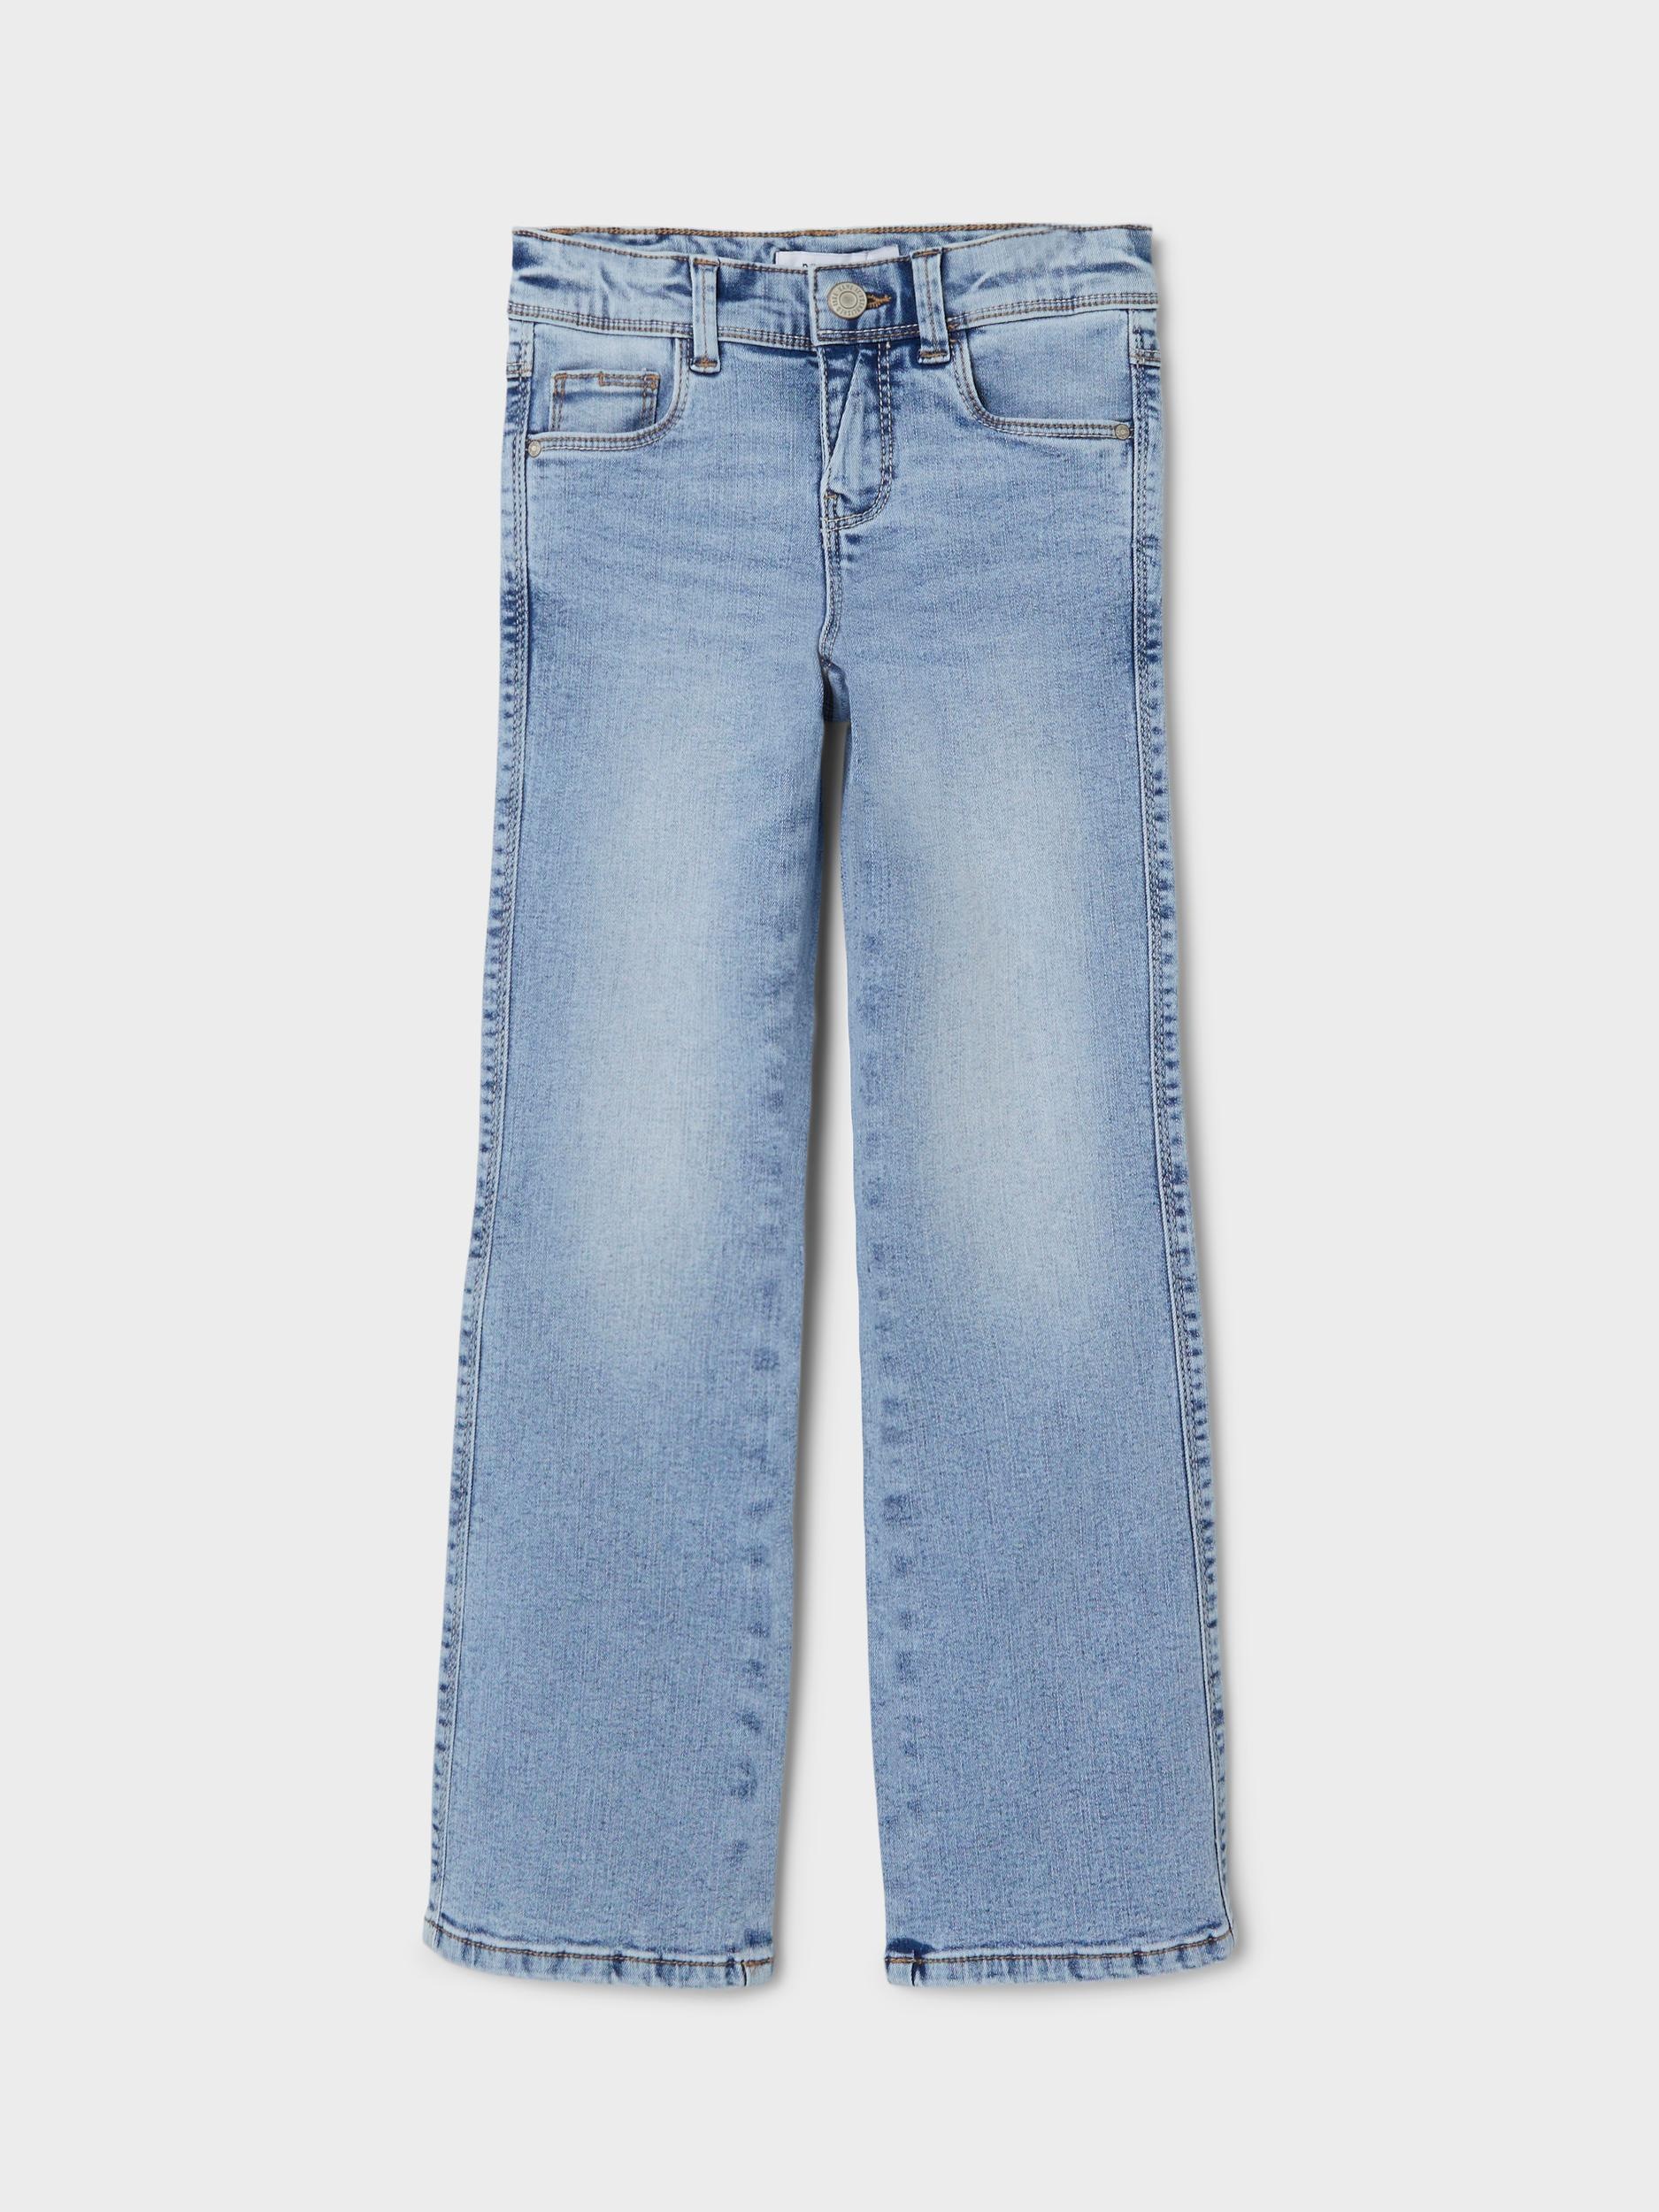 mit Bootcut-Jeans 1142-AU »NKFPOLLY bestellen Stretch SKINNY BOOT NOOS«, It JEANS Name